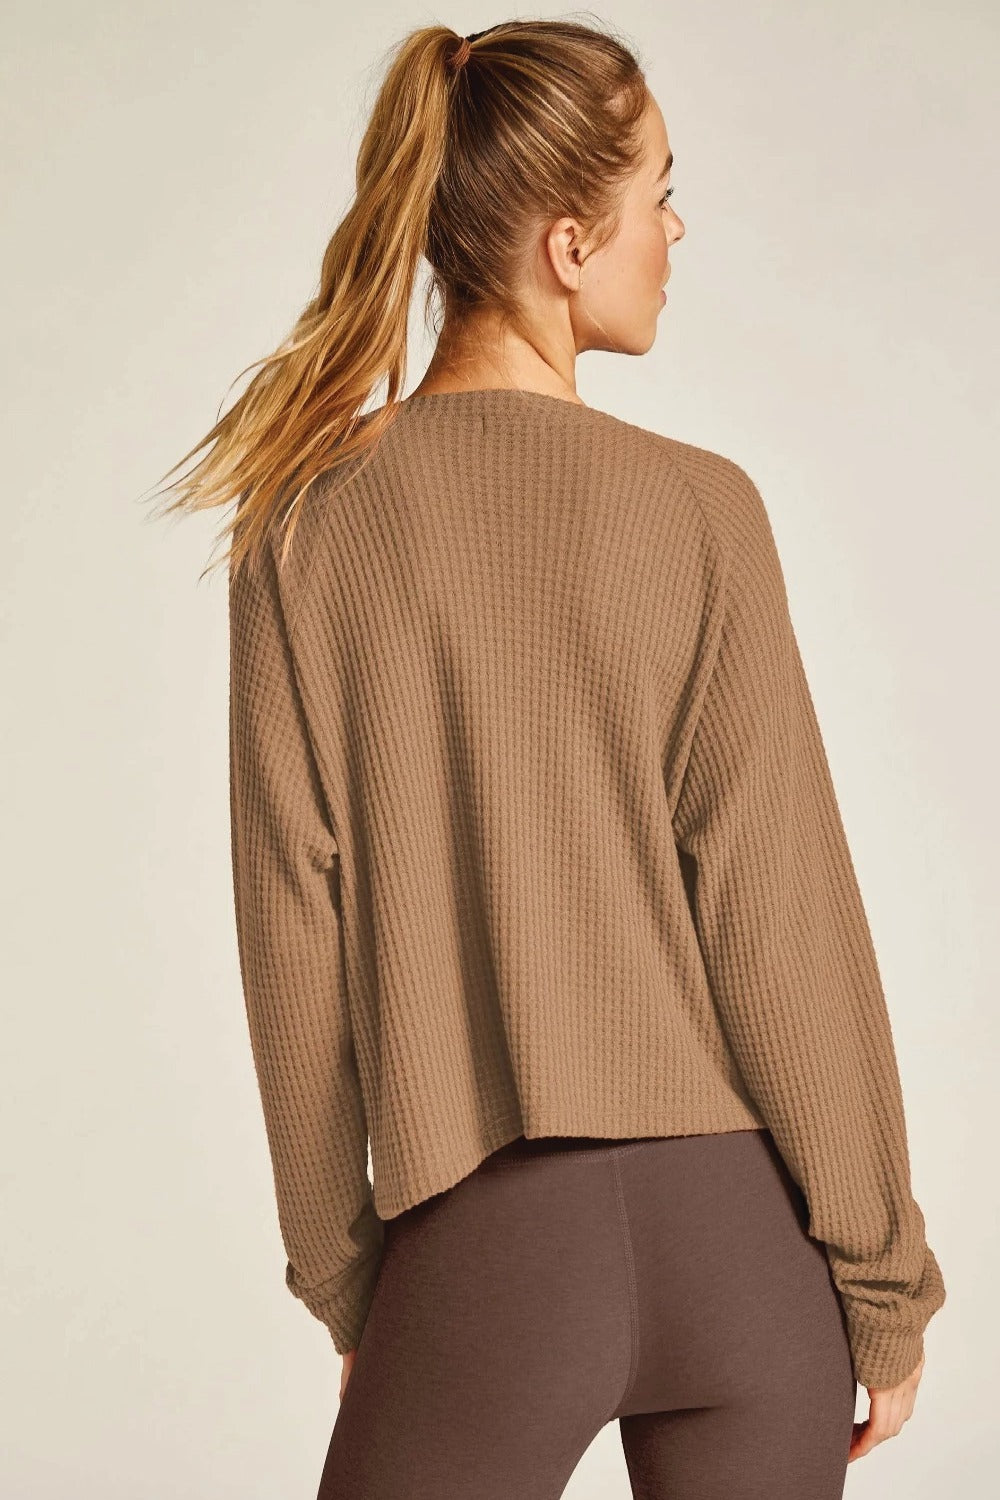 Freestyle Pullover in Toffee